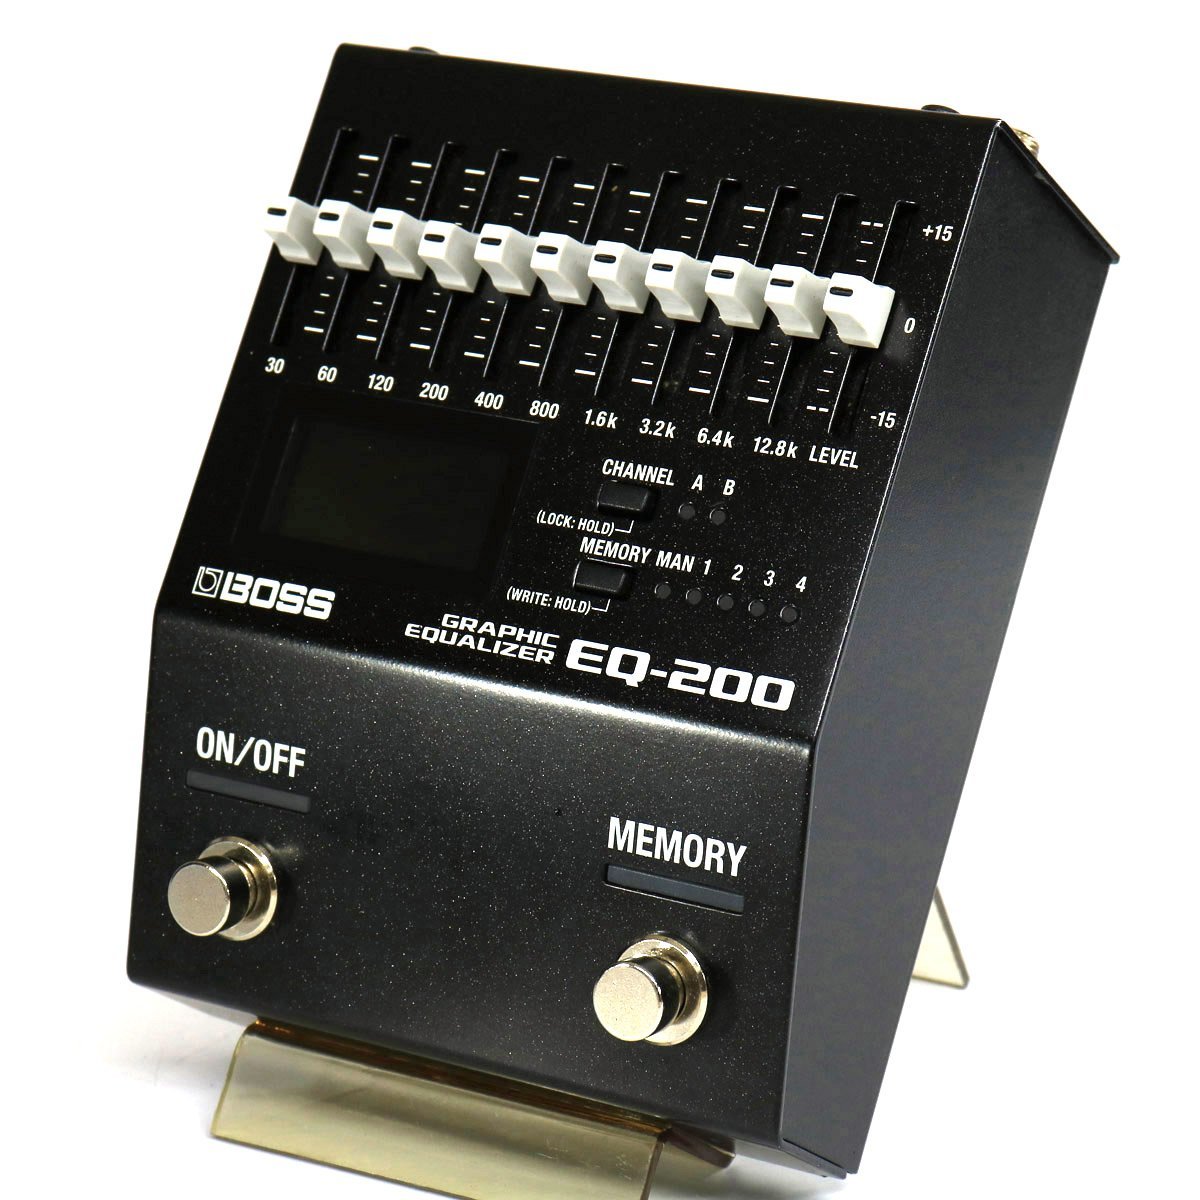 BOSS EQ-200 Graphic Equalizer ギター用イコライザー 【池袋店